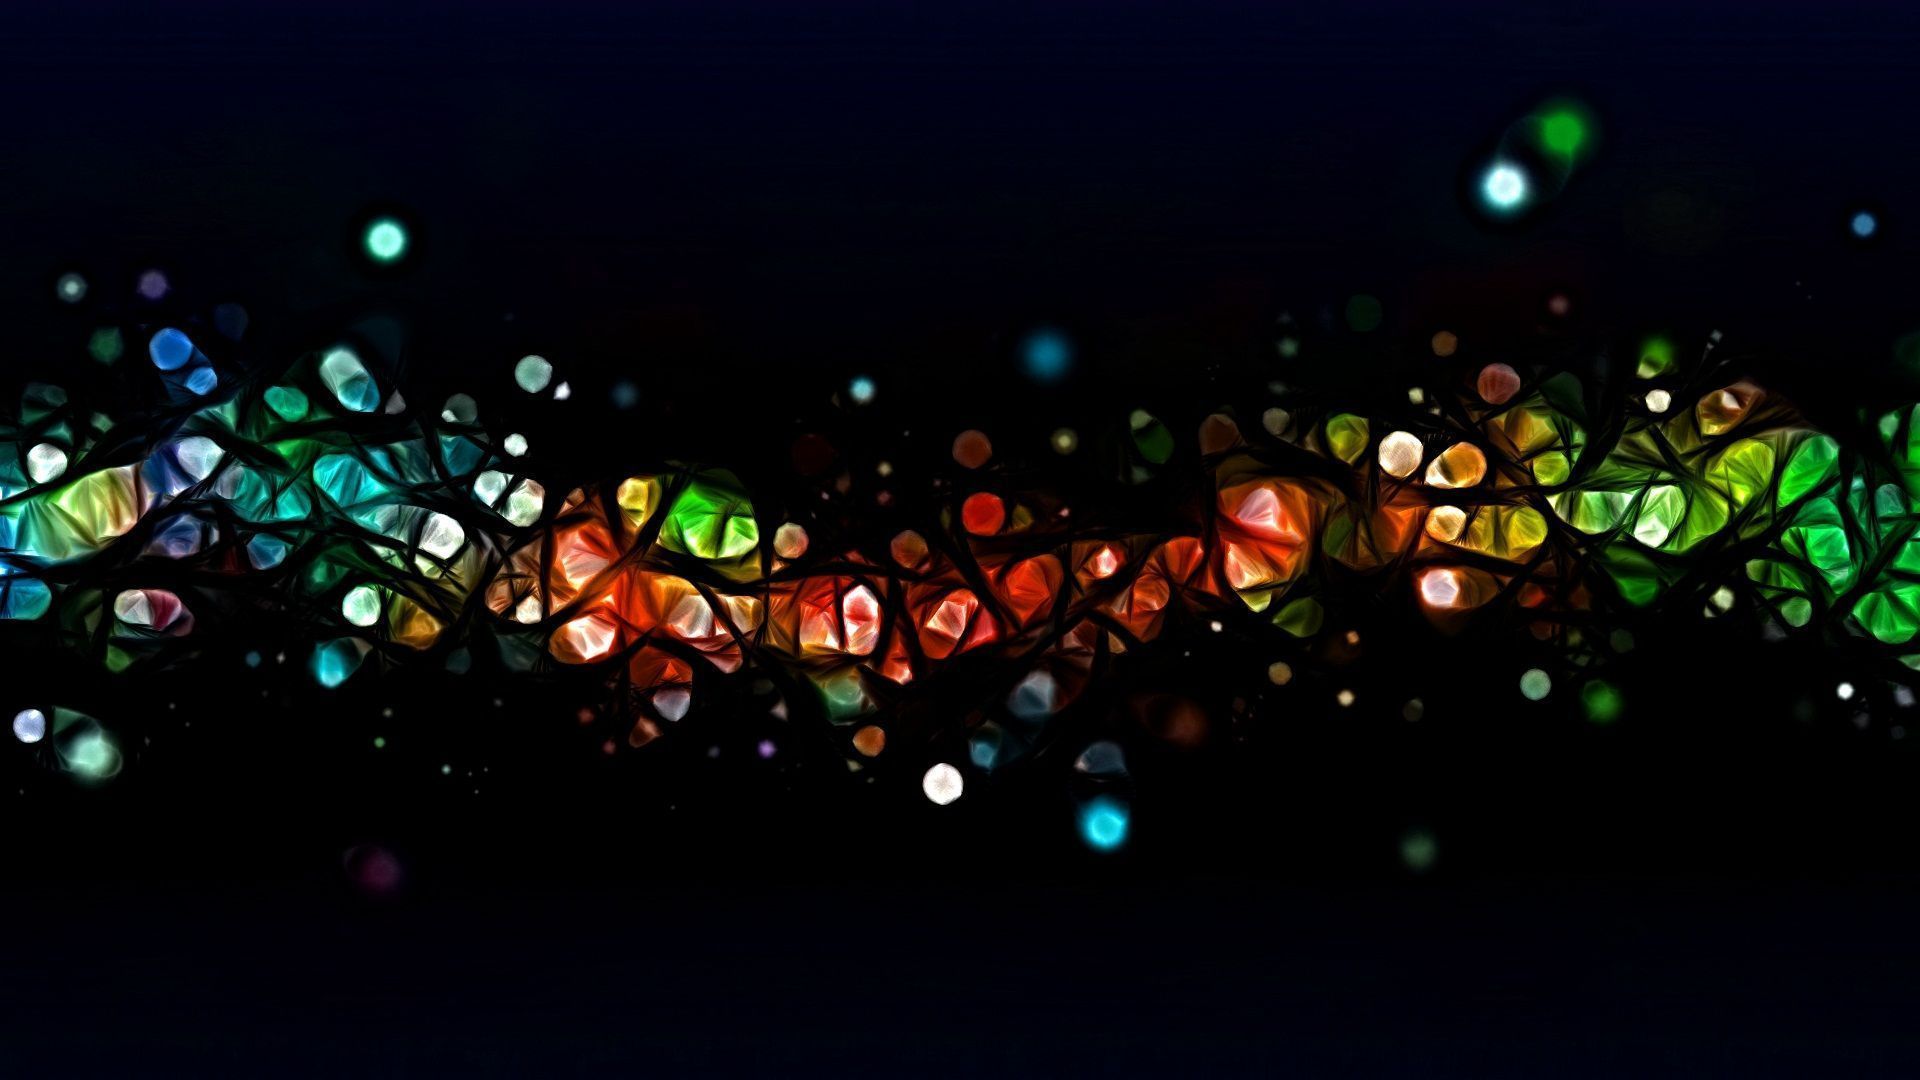 Abstract dna wallpaper i backgrounds - i backgrounds